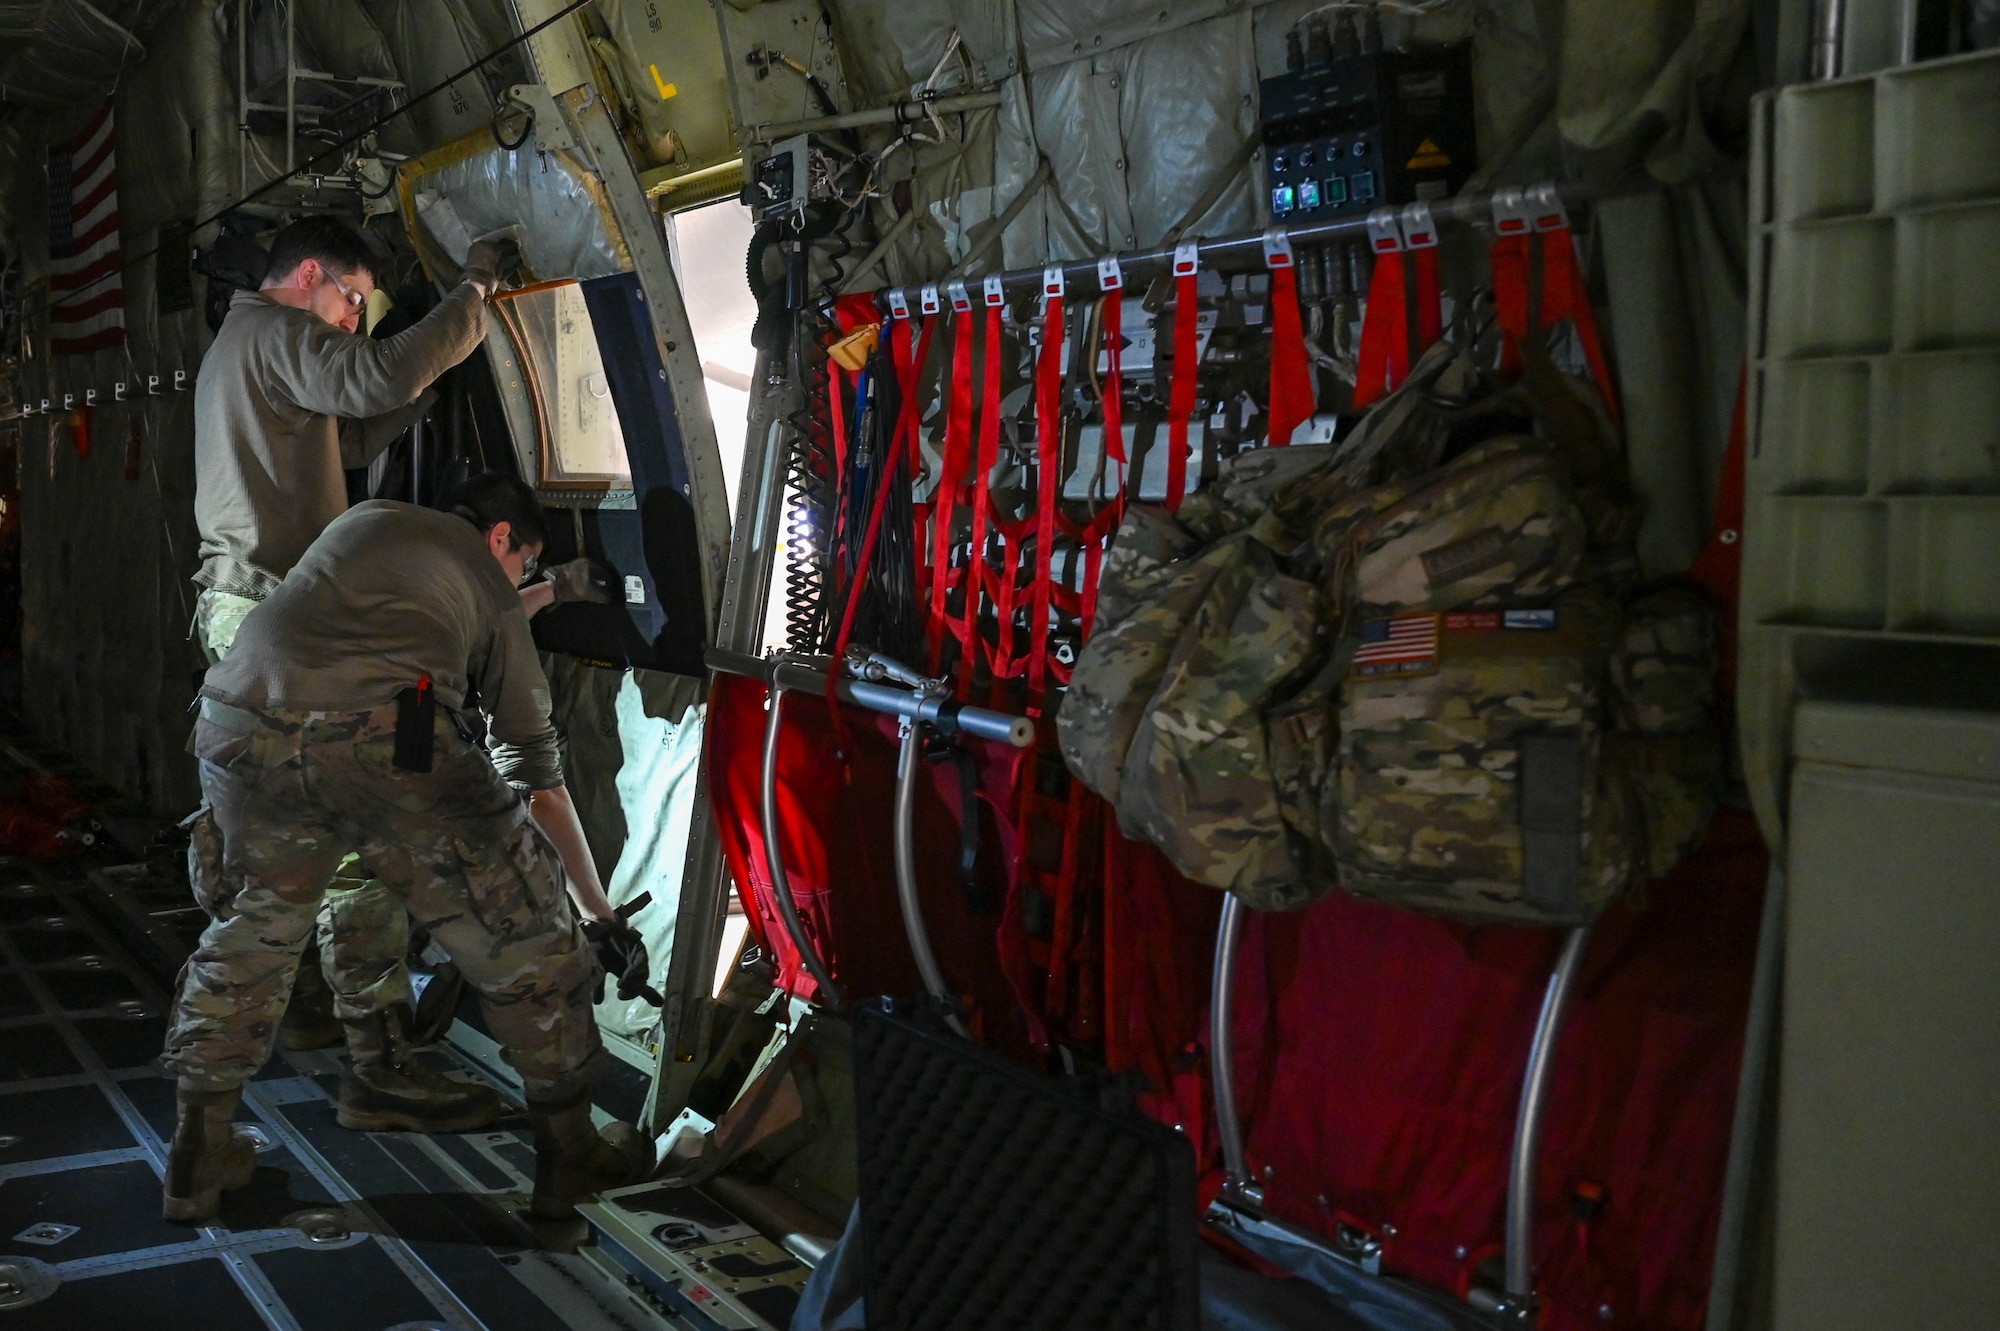 Master Sgt. Jeff McGhee and Senior Airman Khala Walls, aerospace maintainers with the 910th Maintenance Squadron, remove a troop door from a C-130J-30 Super Hercules aircraft from Keesler Air Force Base, Mississippi, visiting Youngstown Air Reserve Station, Ohio, March 19, 2024.